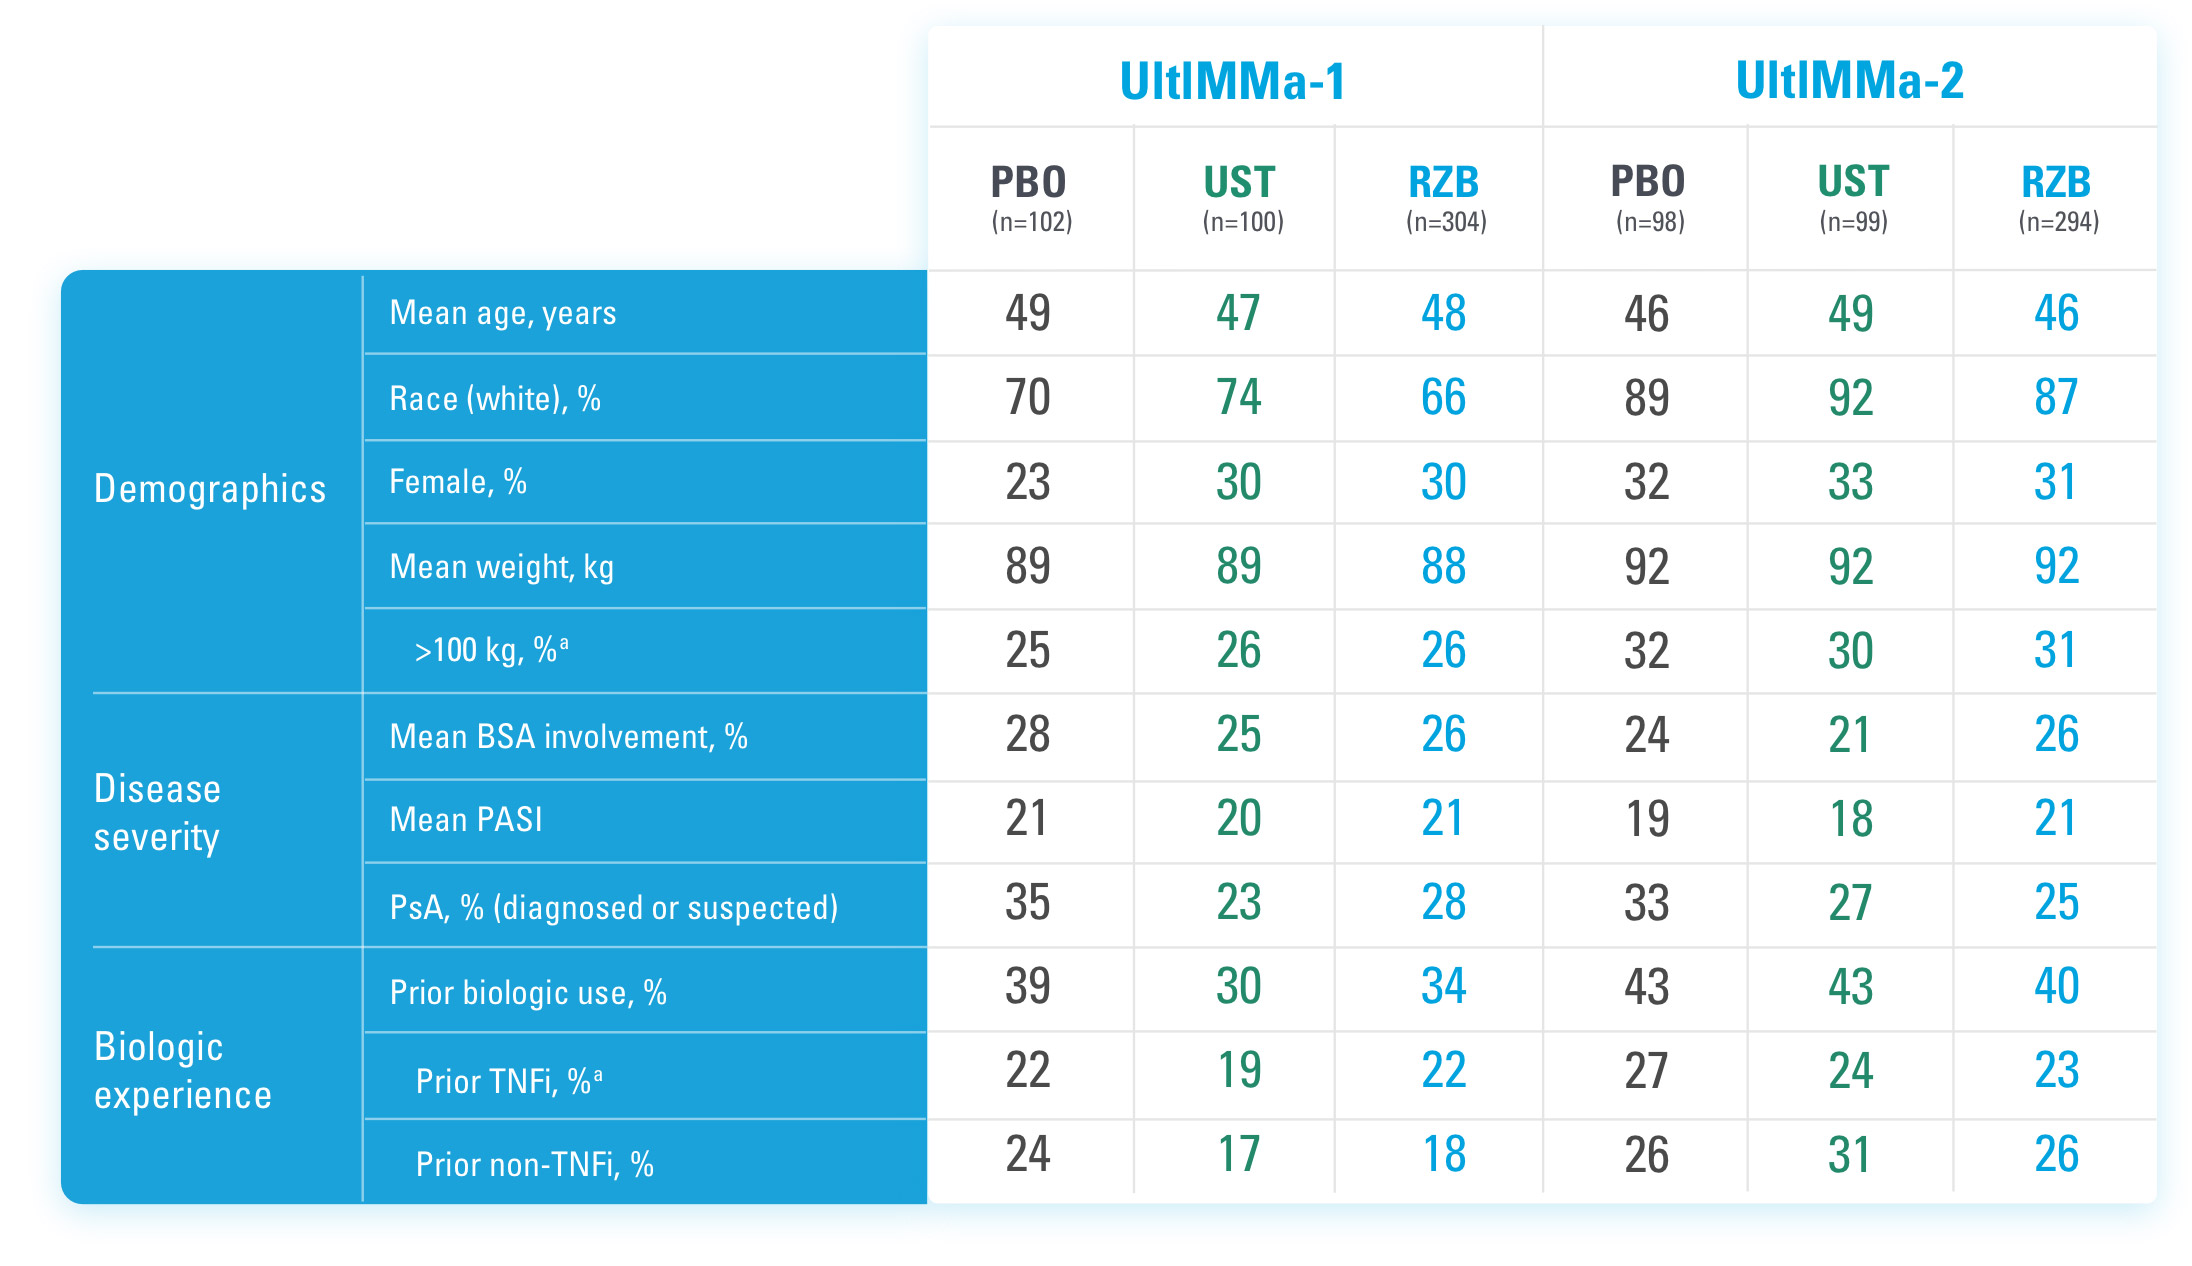 SELECTED BASELINE CHARACTERISTICS - UltIMMa-1 and UltIMMa-2 (LIMMitless OLE).